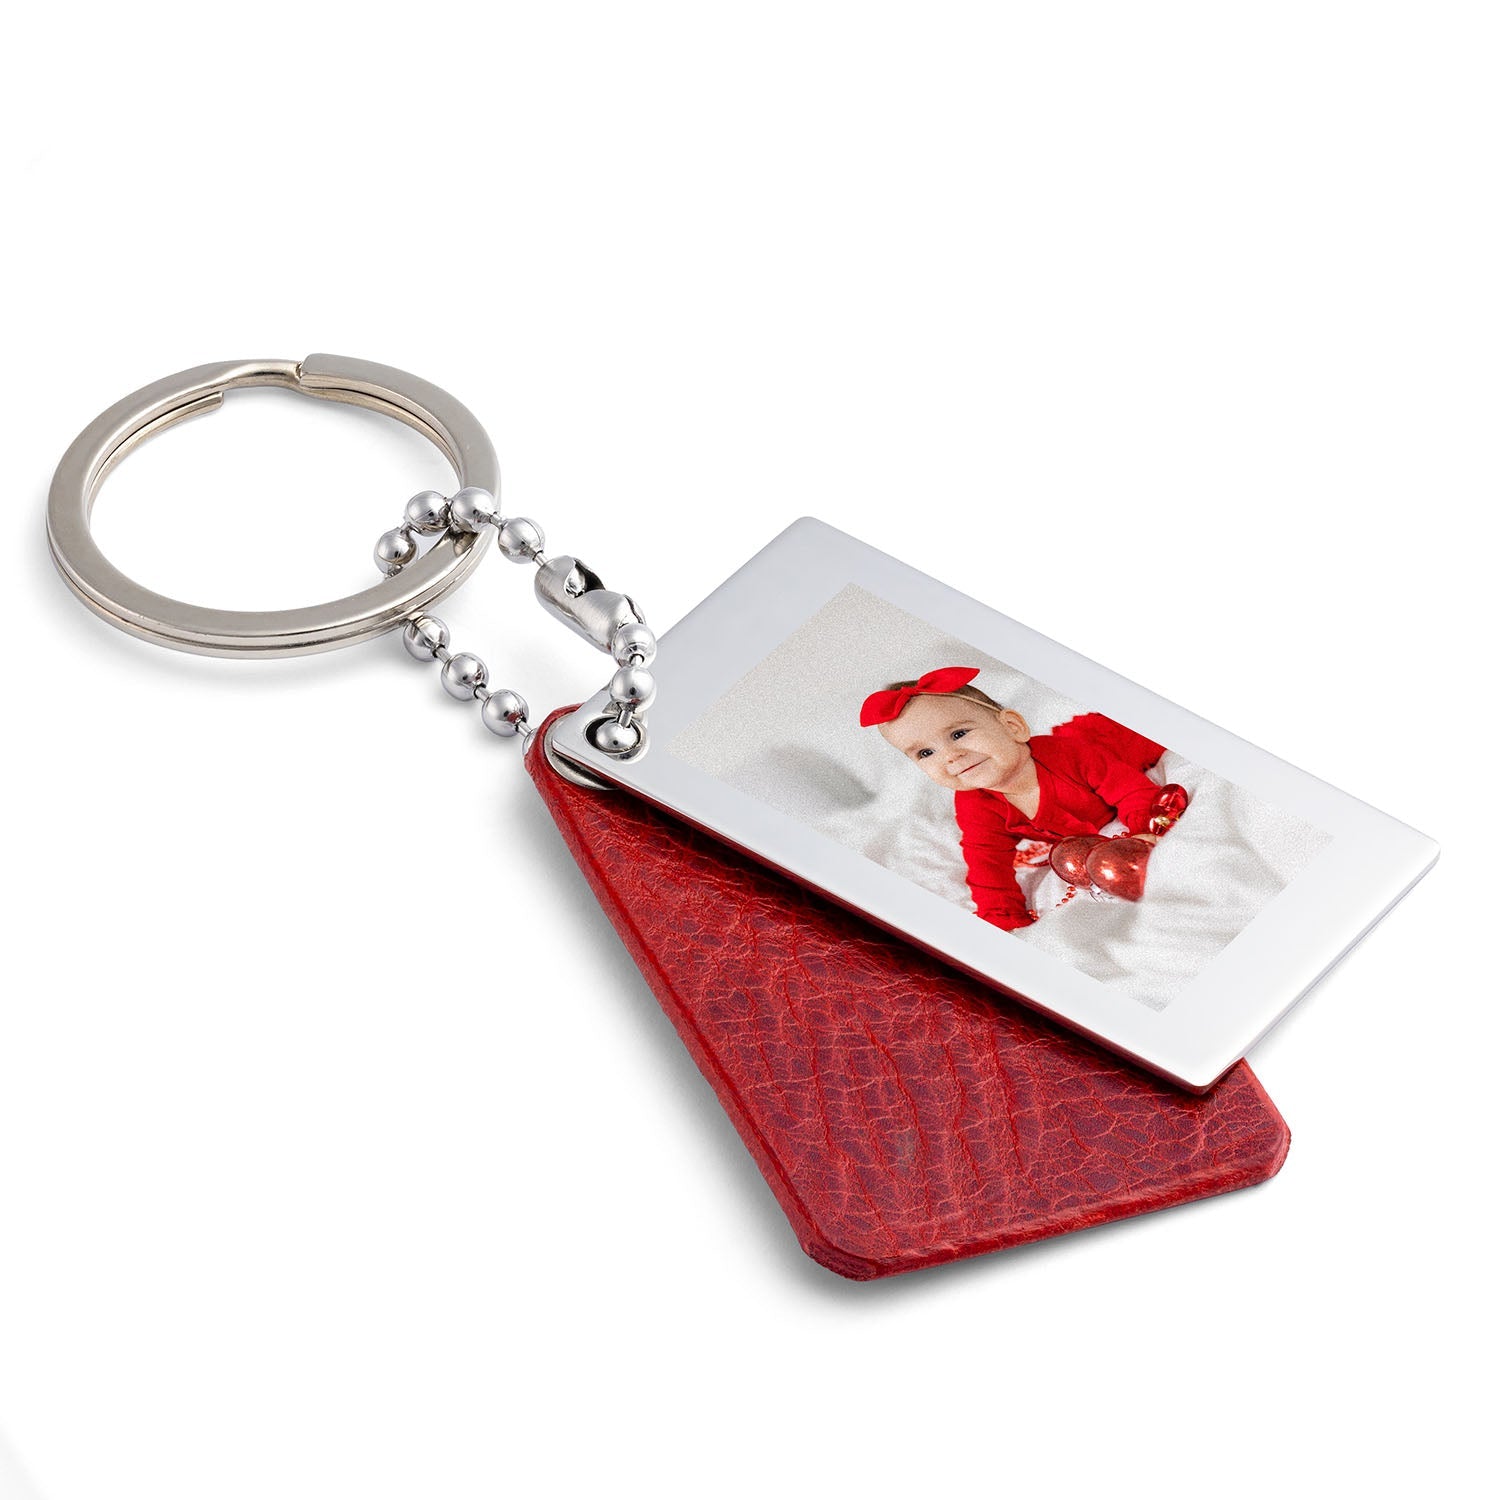 Red Leather Photo Keyring with Engraving - seQua.Shop